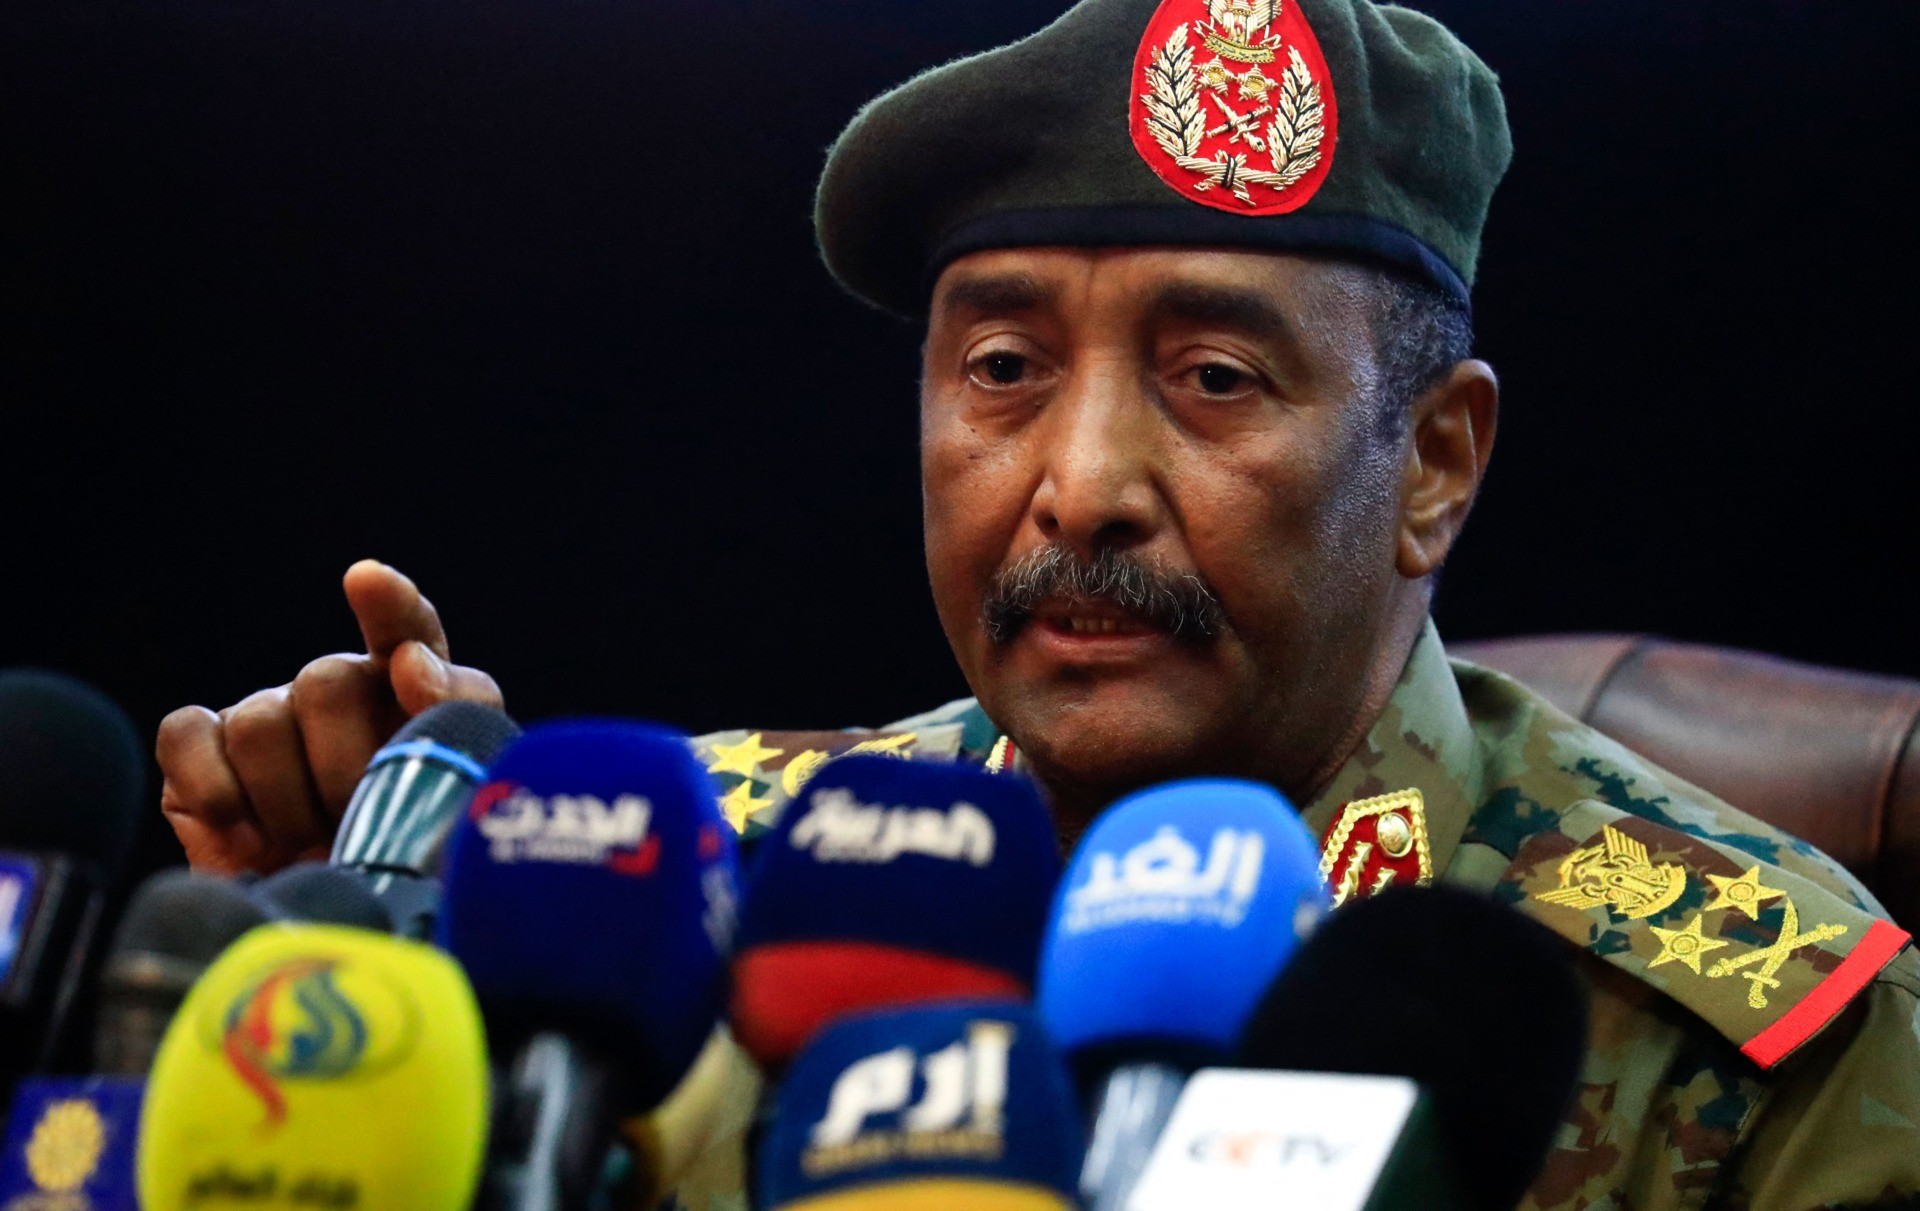 Sudan's top army general Abdel Fattah al-Burhan holds a press conference at the General Command of the Armed Forces in Khartoum on October 26, 2021. - Angry Sudanese stood their ground in street protests against a coup, as international condemnation of the military's takeover poured in ahead of a UN Security Council meeting. (Photo by ASHRAF SHAZLY / AFP) (Photo by ASHRAF SHAZLY/AFP via Getty Images)